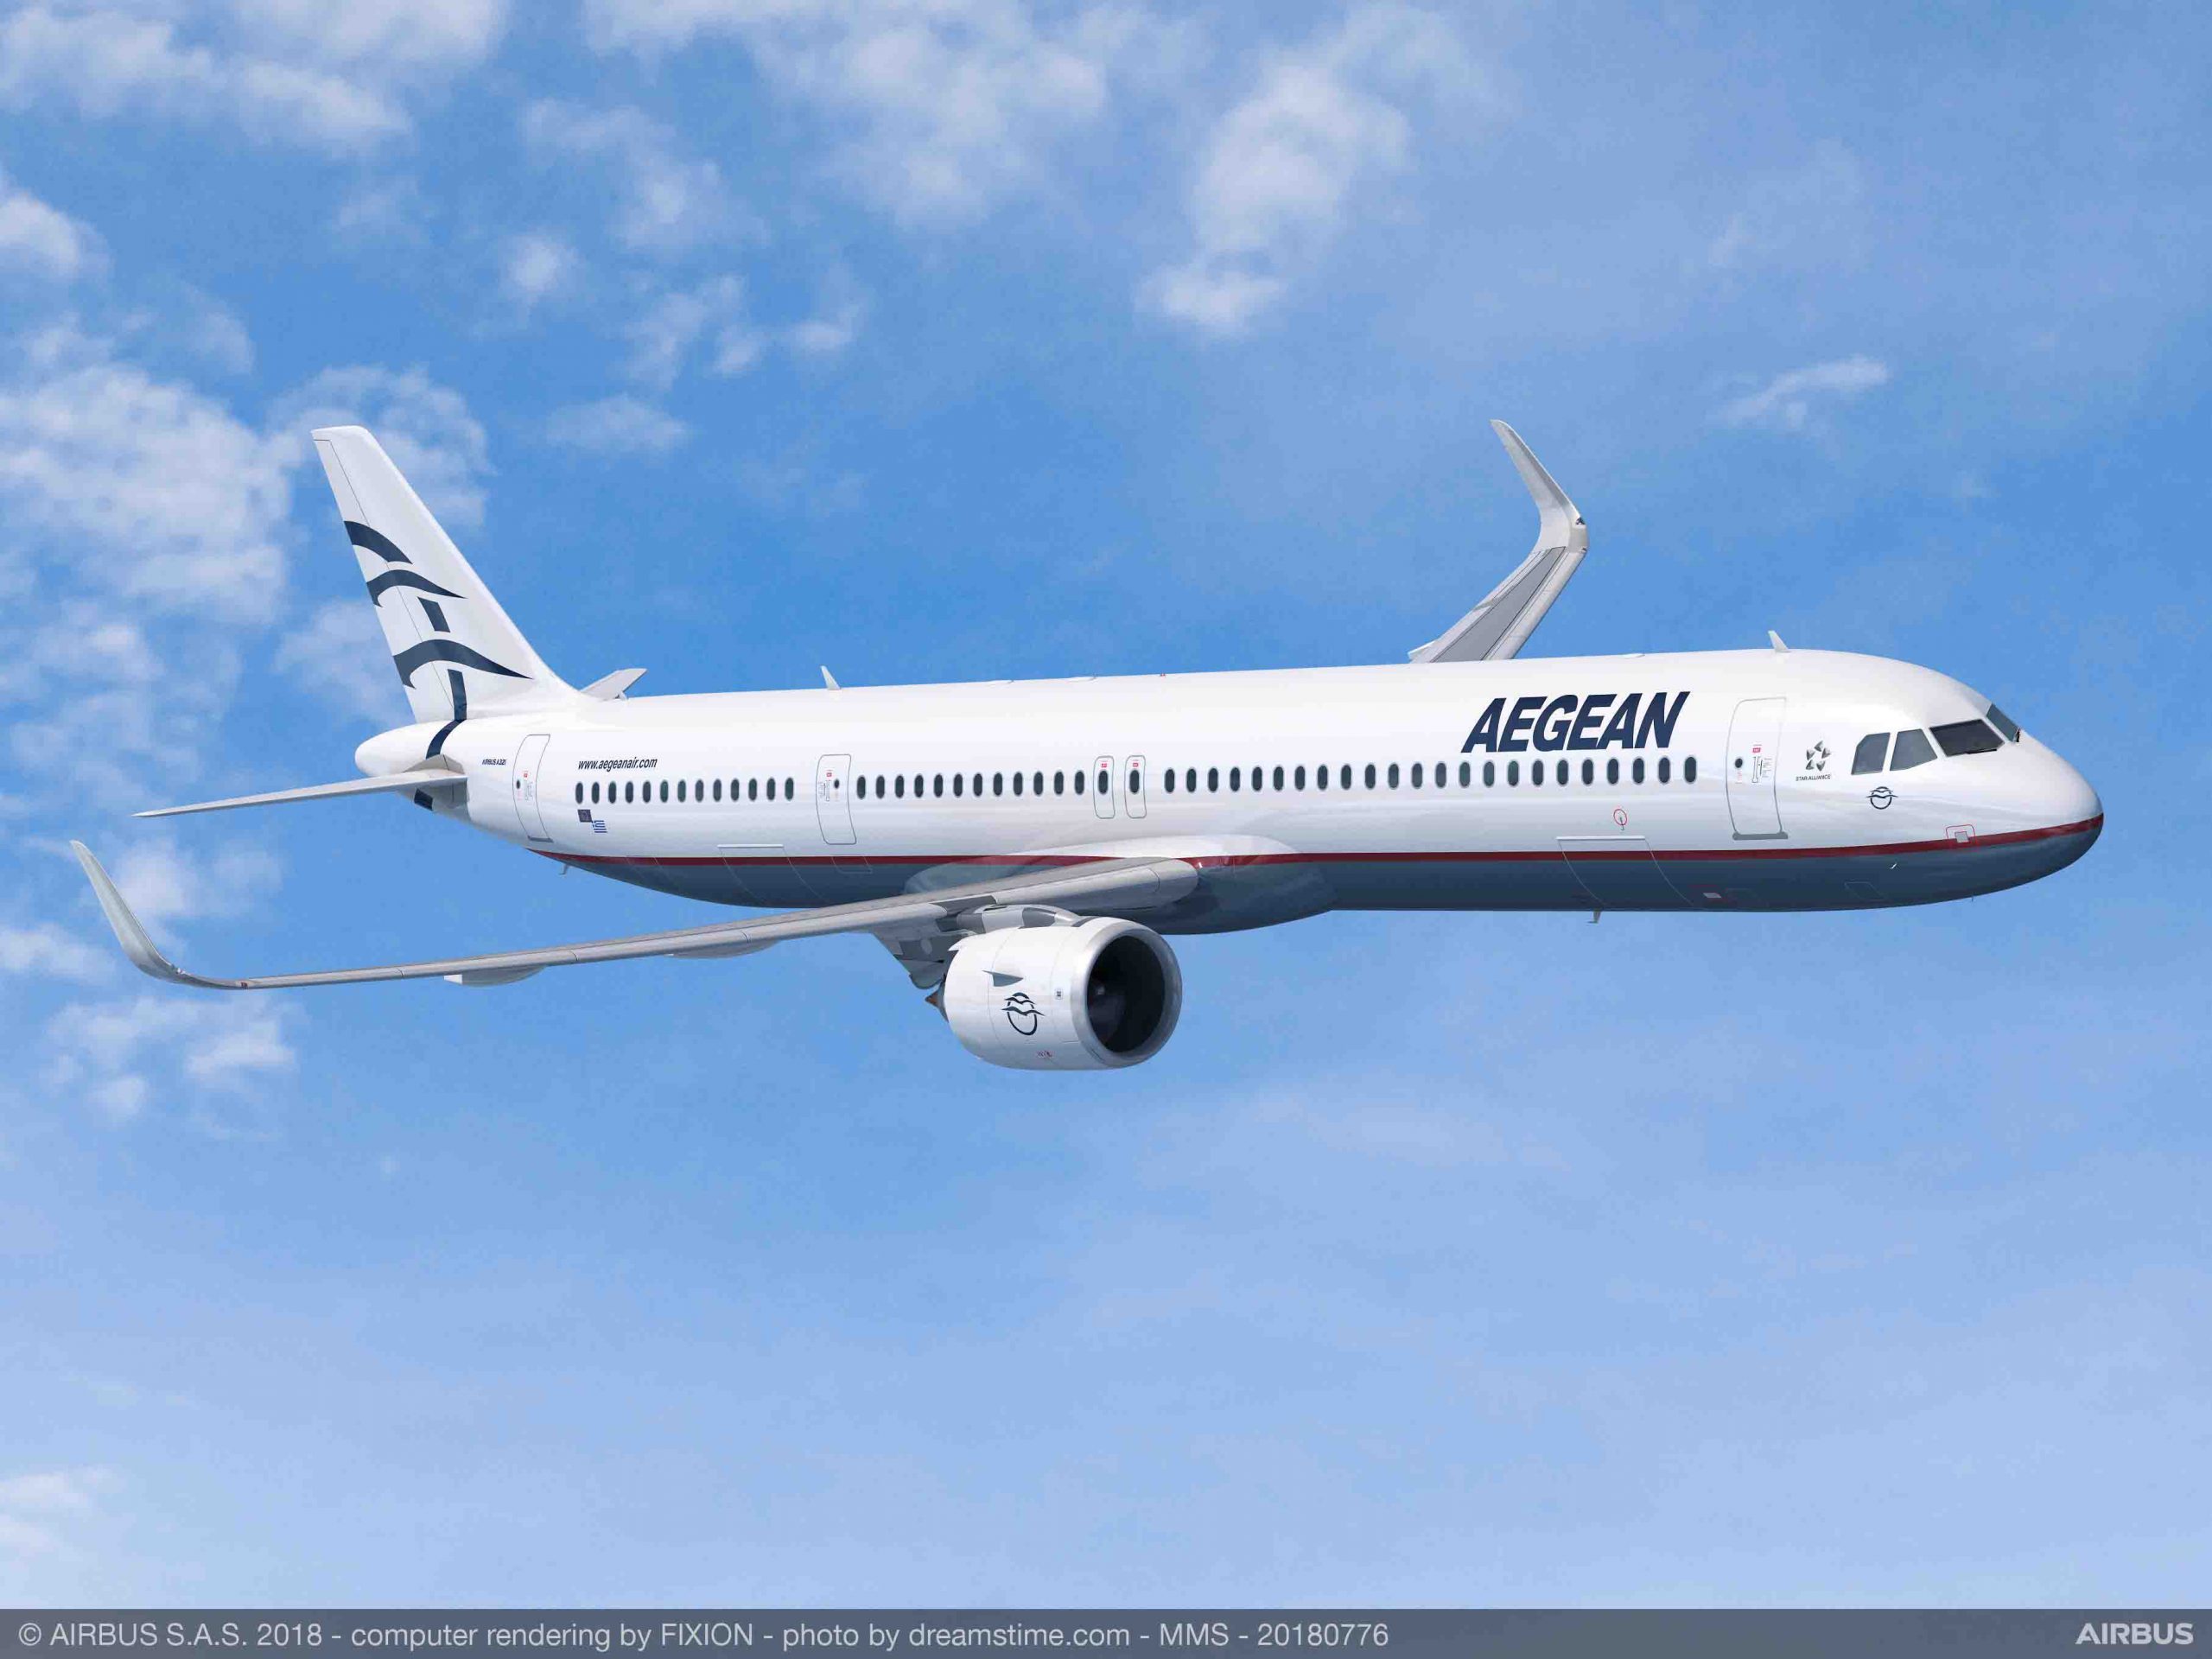 Aegean finalises secured loan for new A321neo aircraft